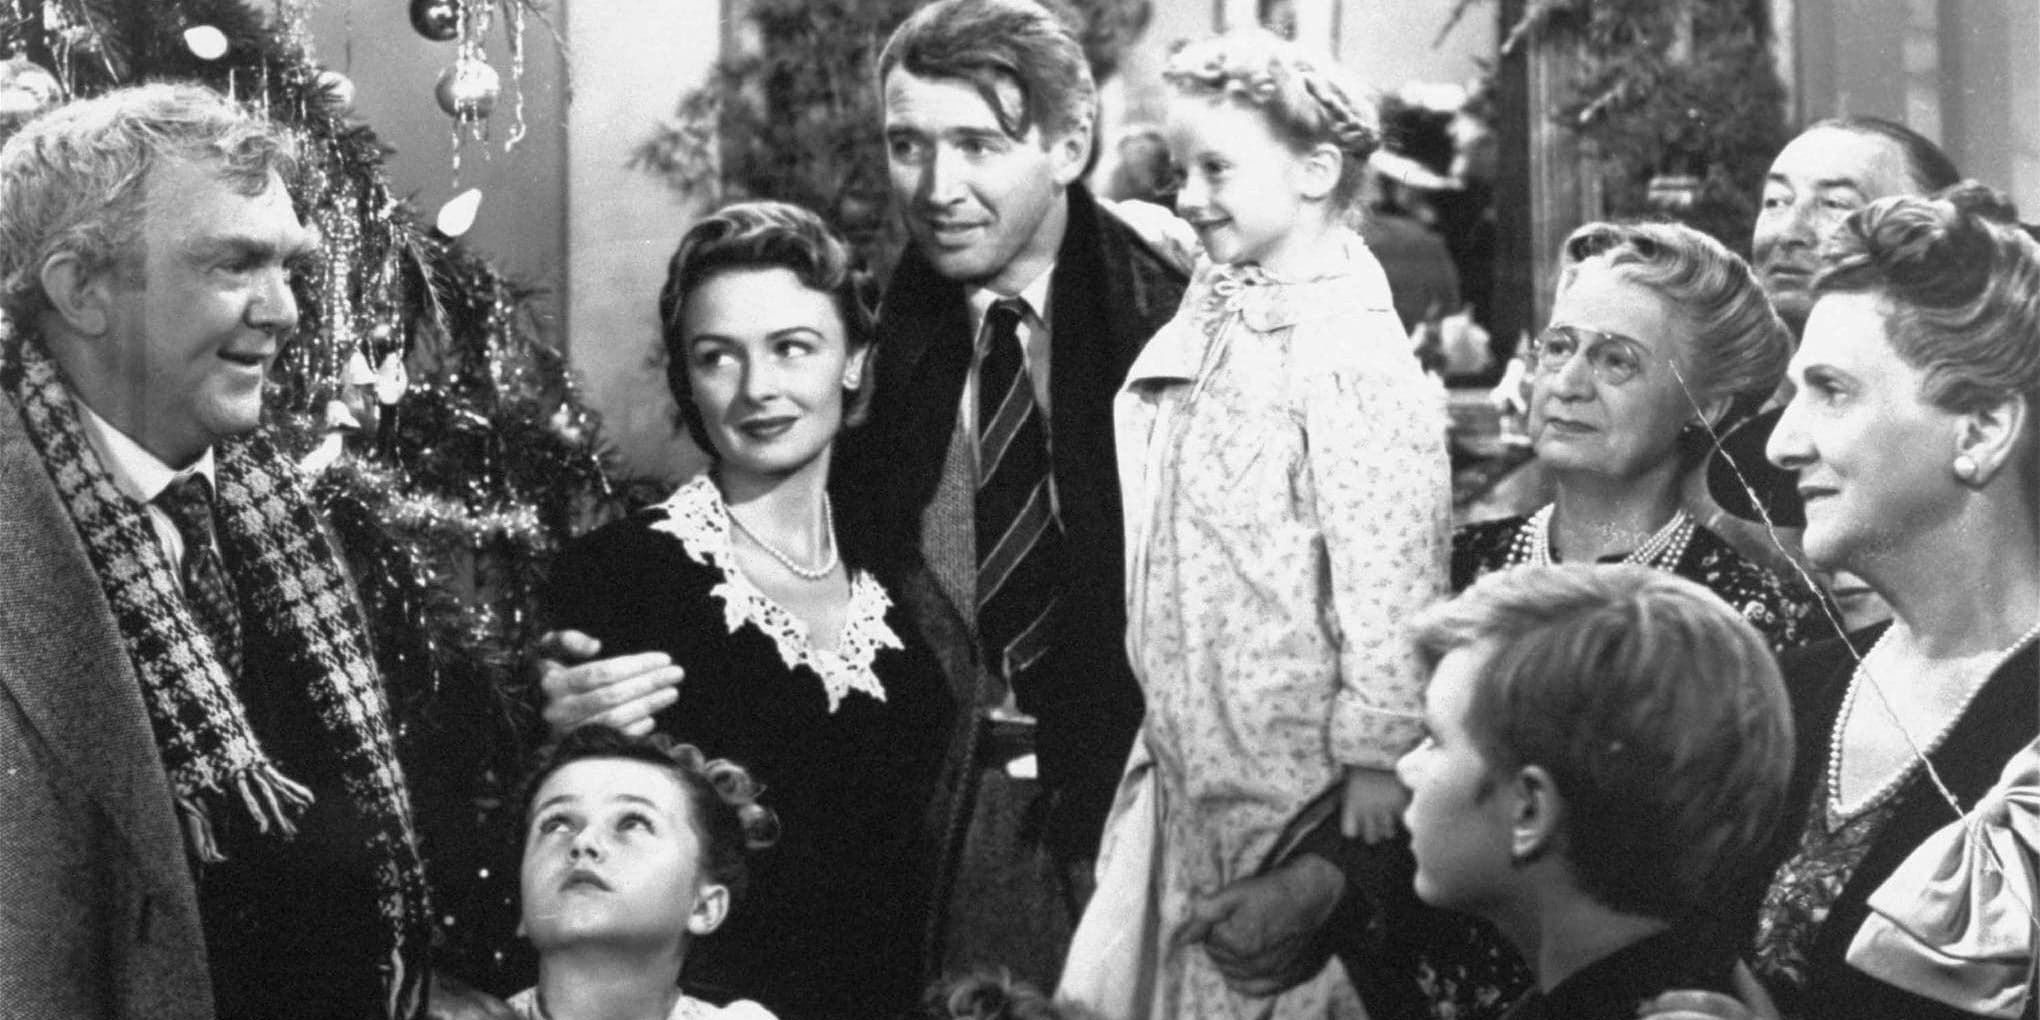 The Bailey family in It's a Wonderful Life 